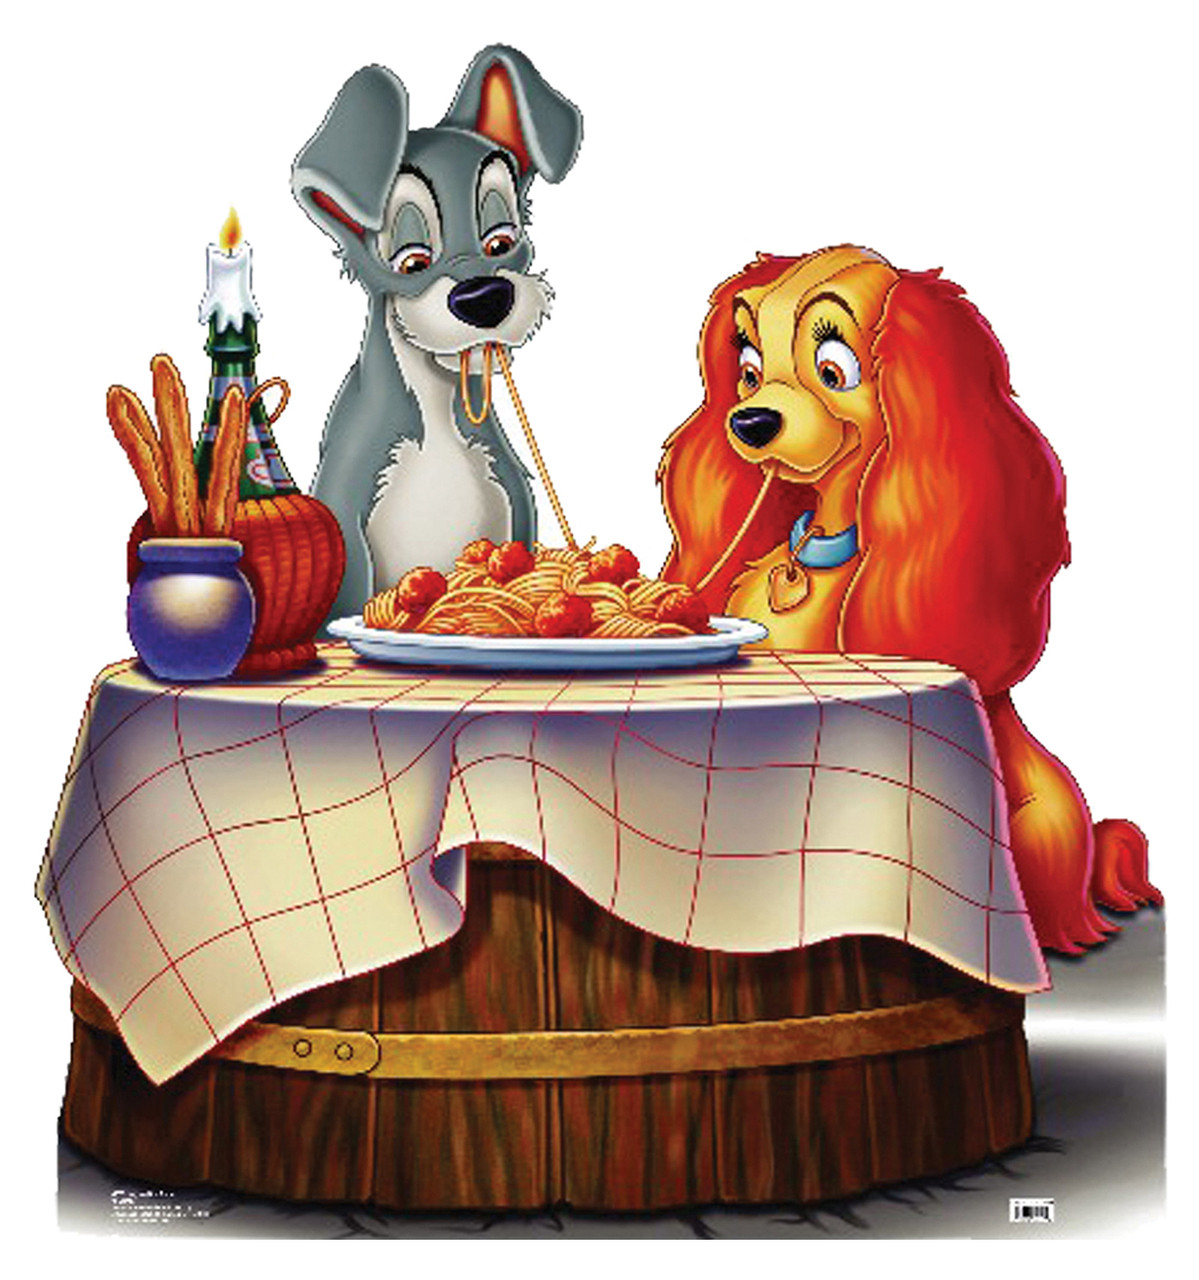 Life-size Lady and the Tramp Cardboard Standup